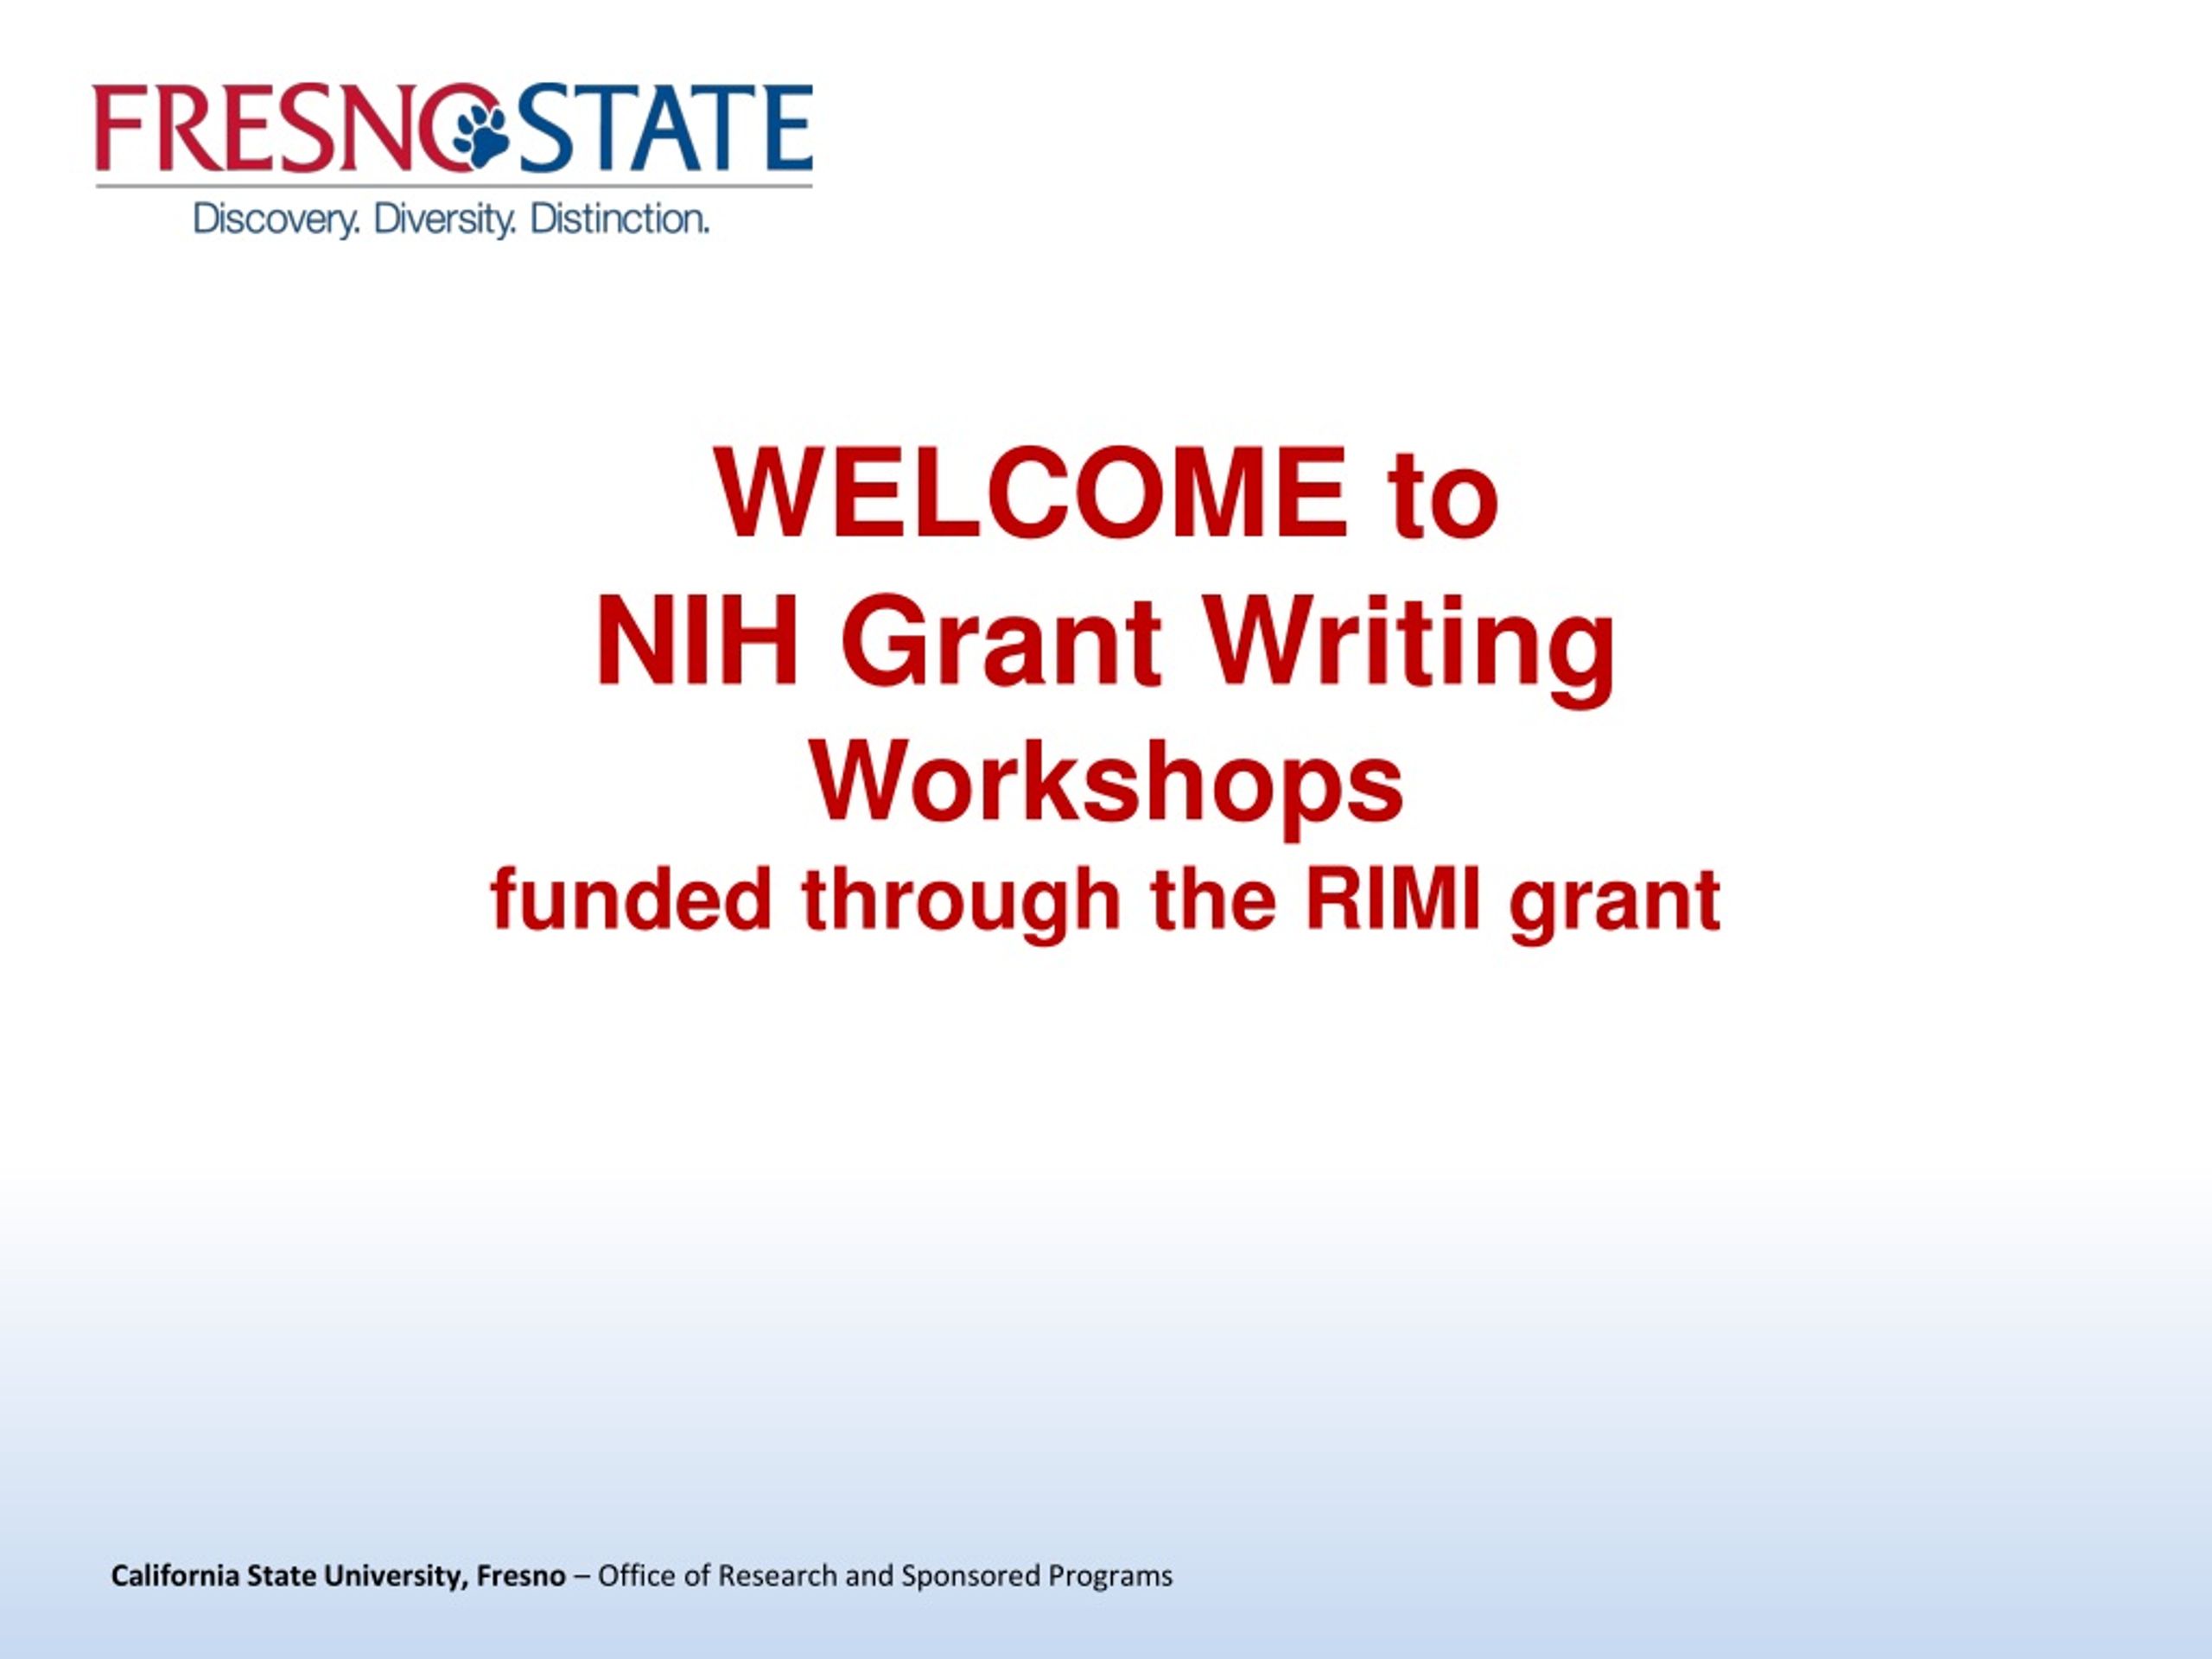 PPT to NIH Grant Writing funded through the RIMI